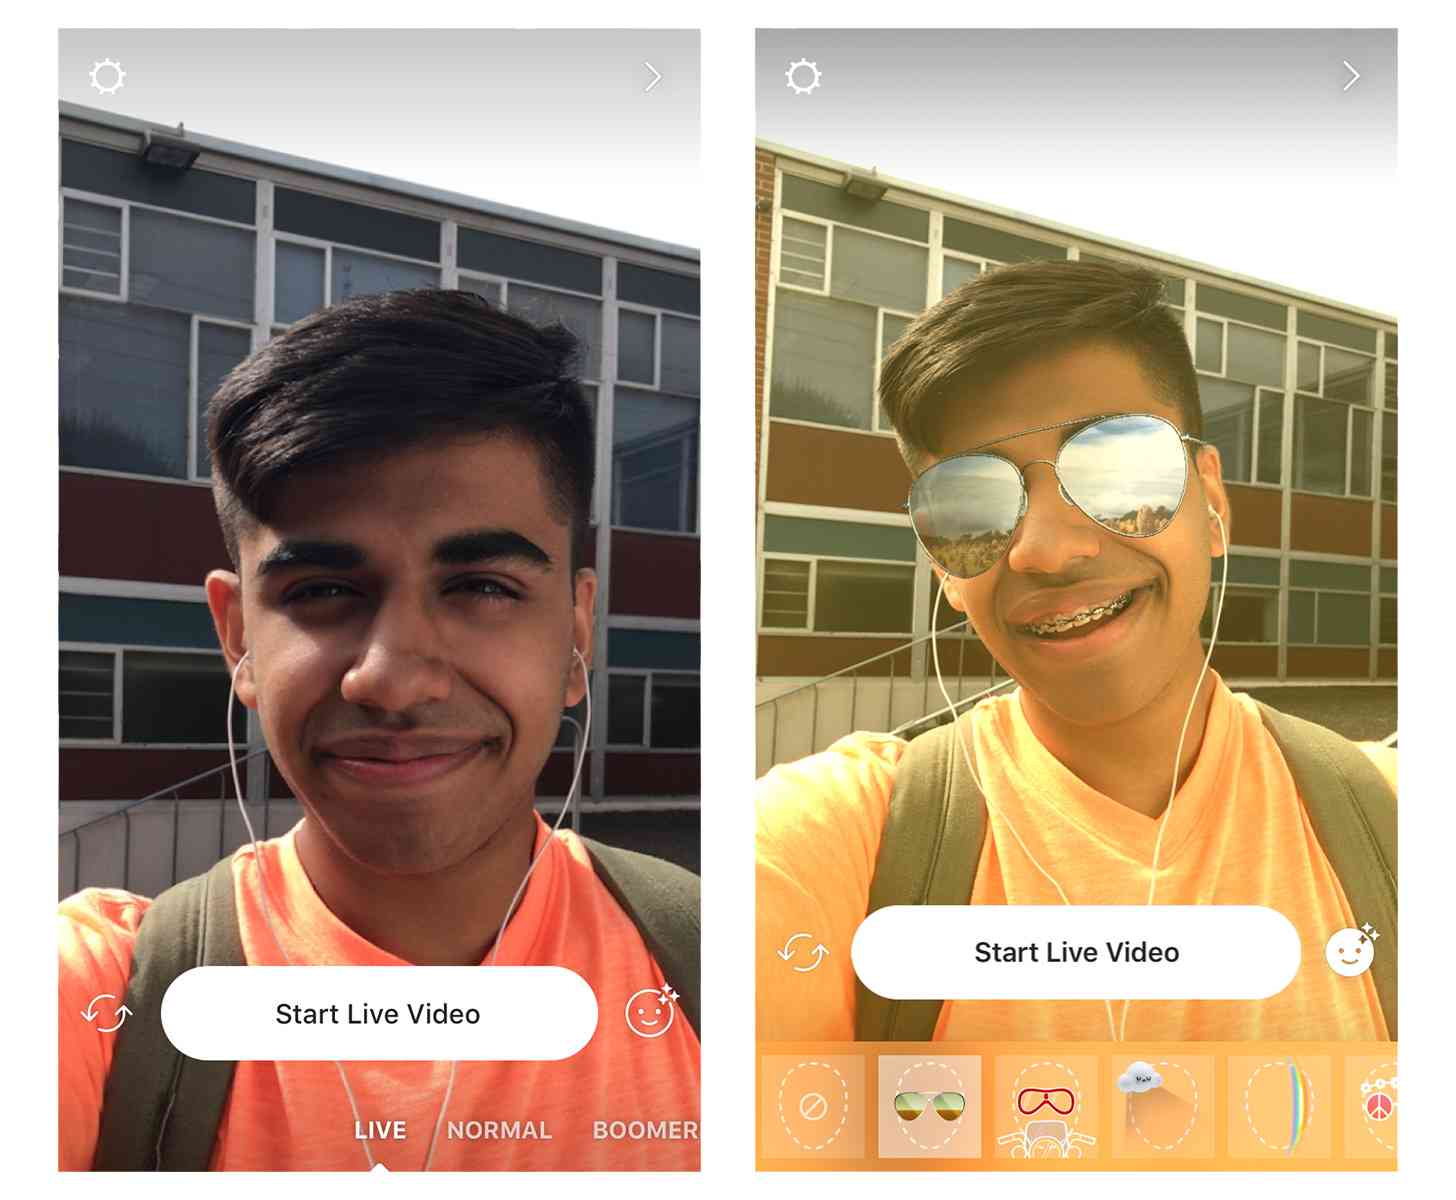 Instagram live video face filters sunglasses before broadcast